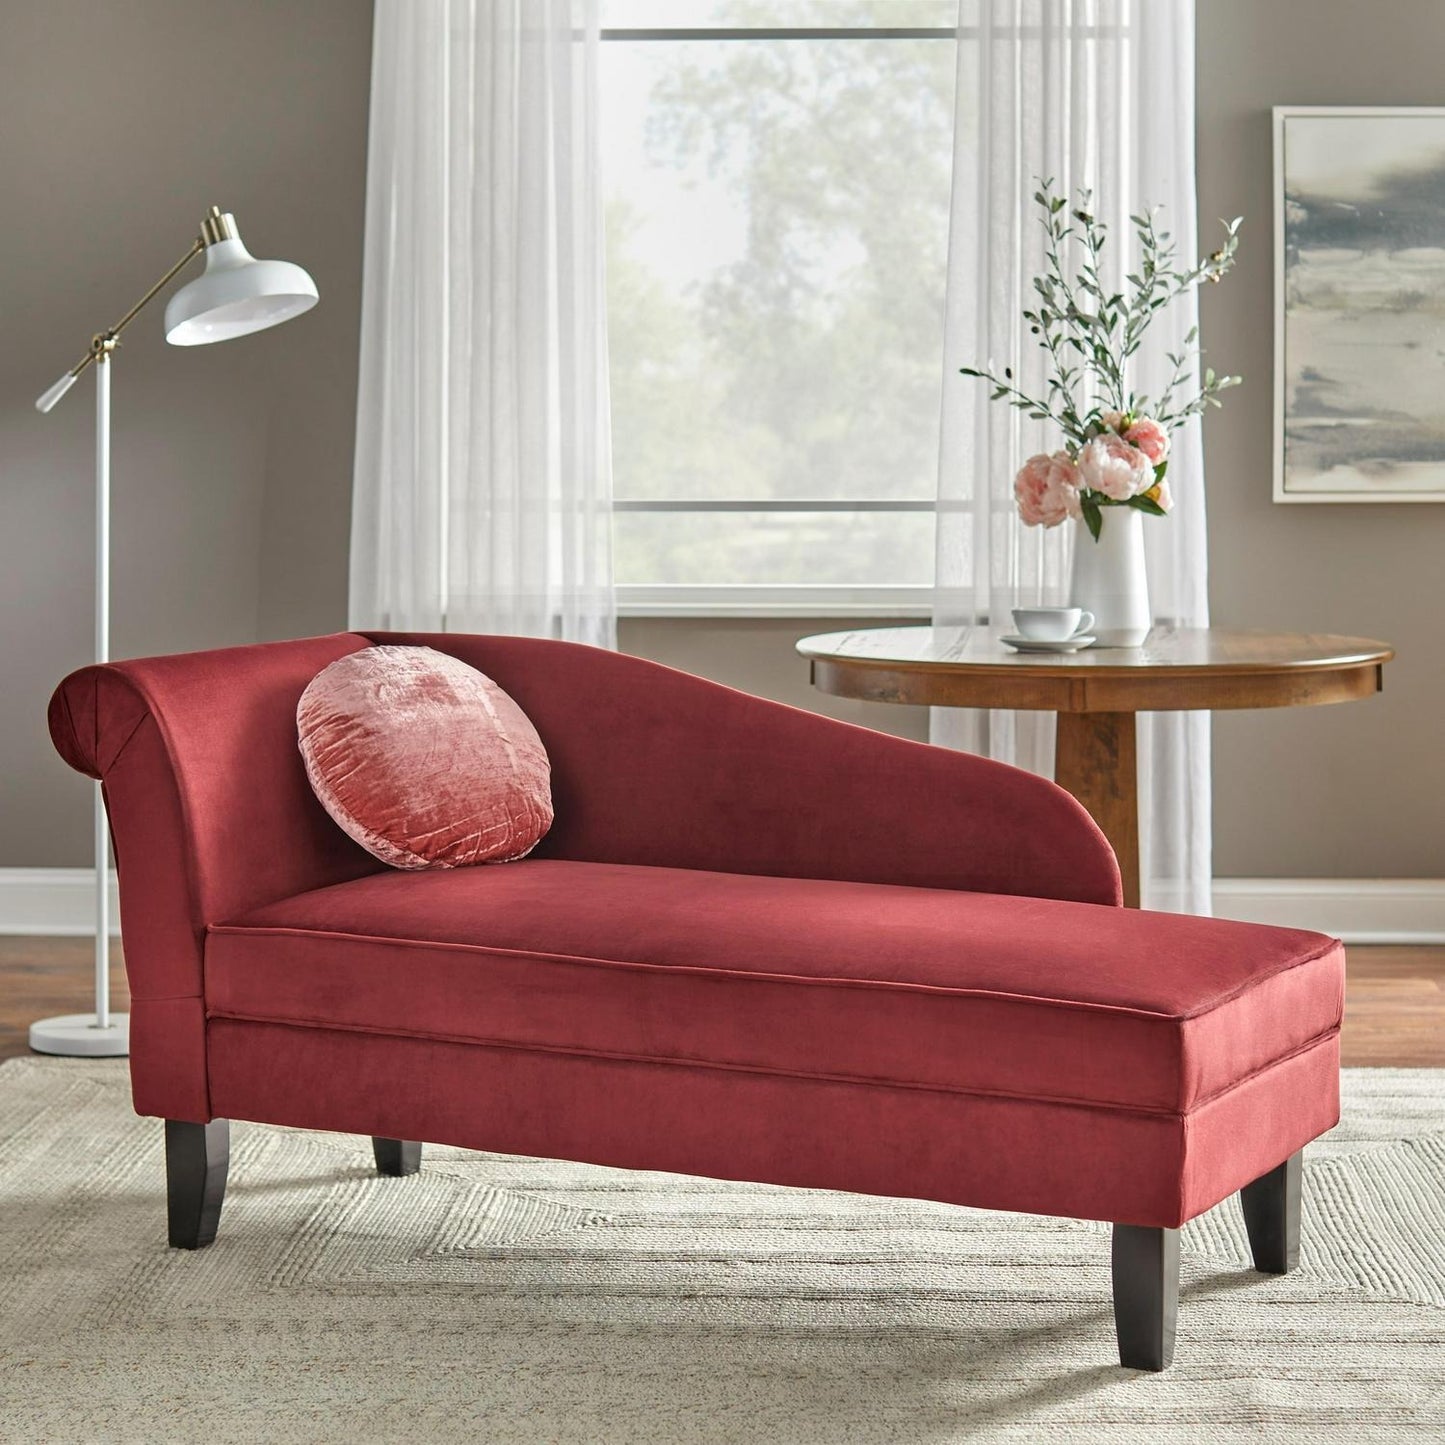 Burgundy Finish Upholstered Chaise Lounge with Storage Compartment